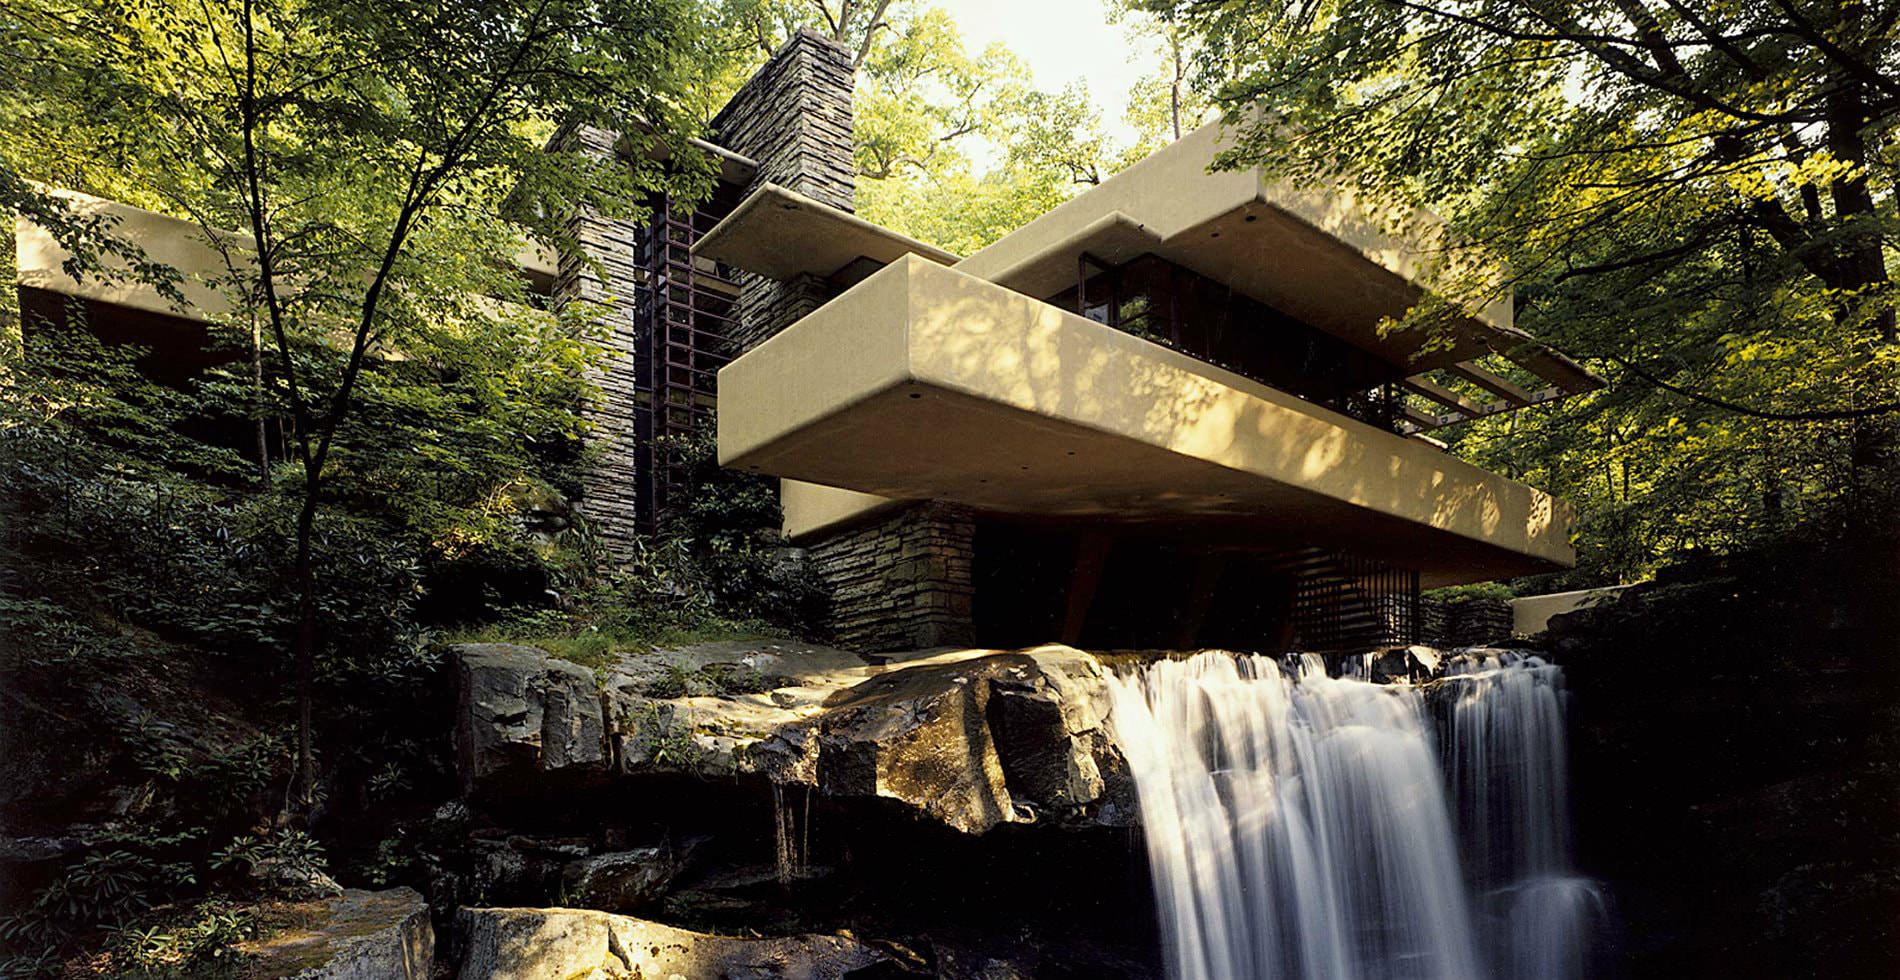 A modernized grey stone building built at the edge of a waterfall and stream, surrounded by thick foliage and bushes